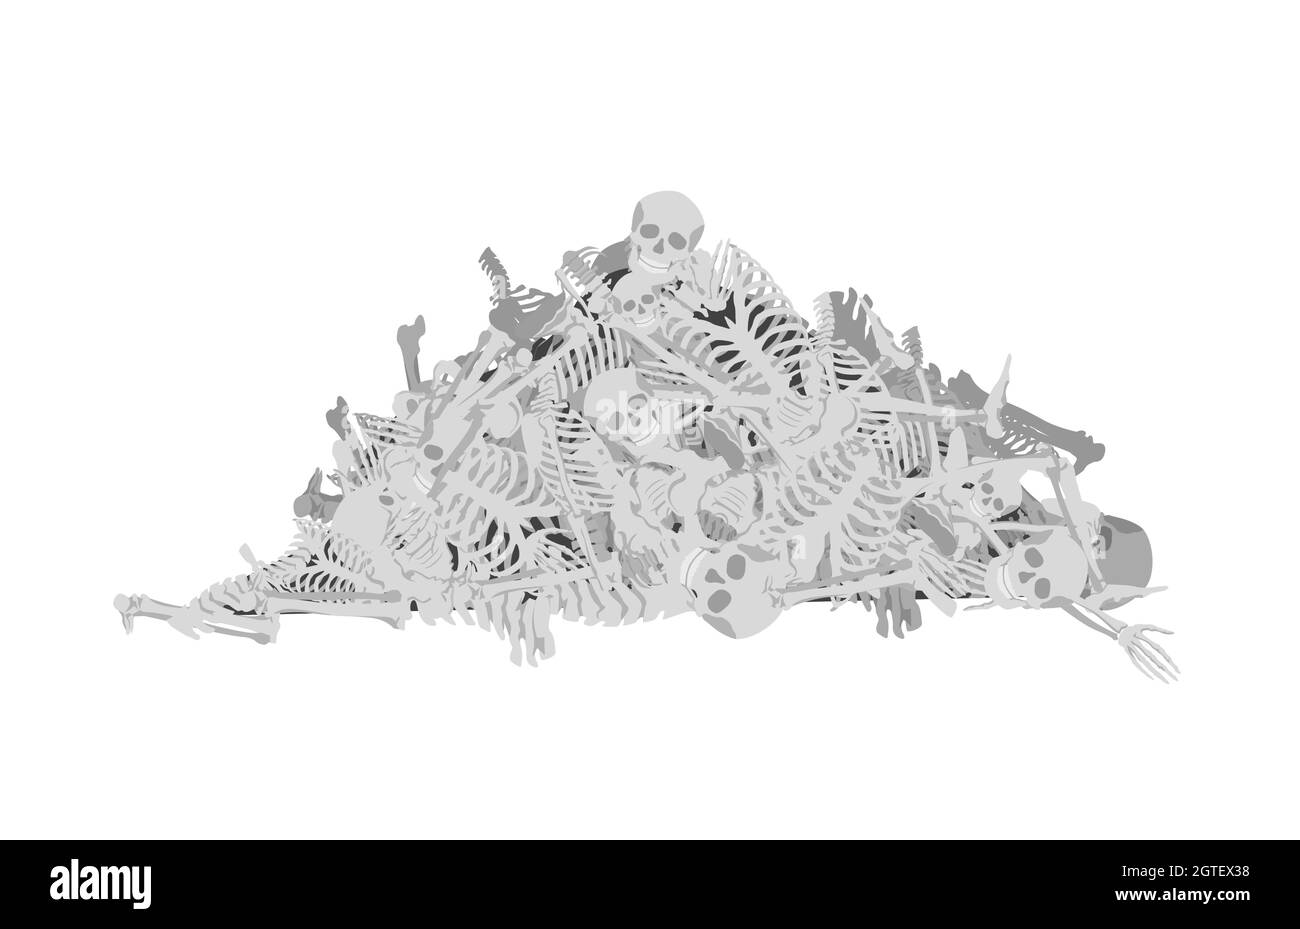 Mountain of human bones. Aftermath of gruesome mass murder ancient burial of dead Stock Vector